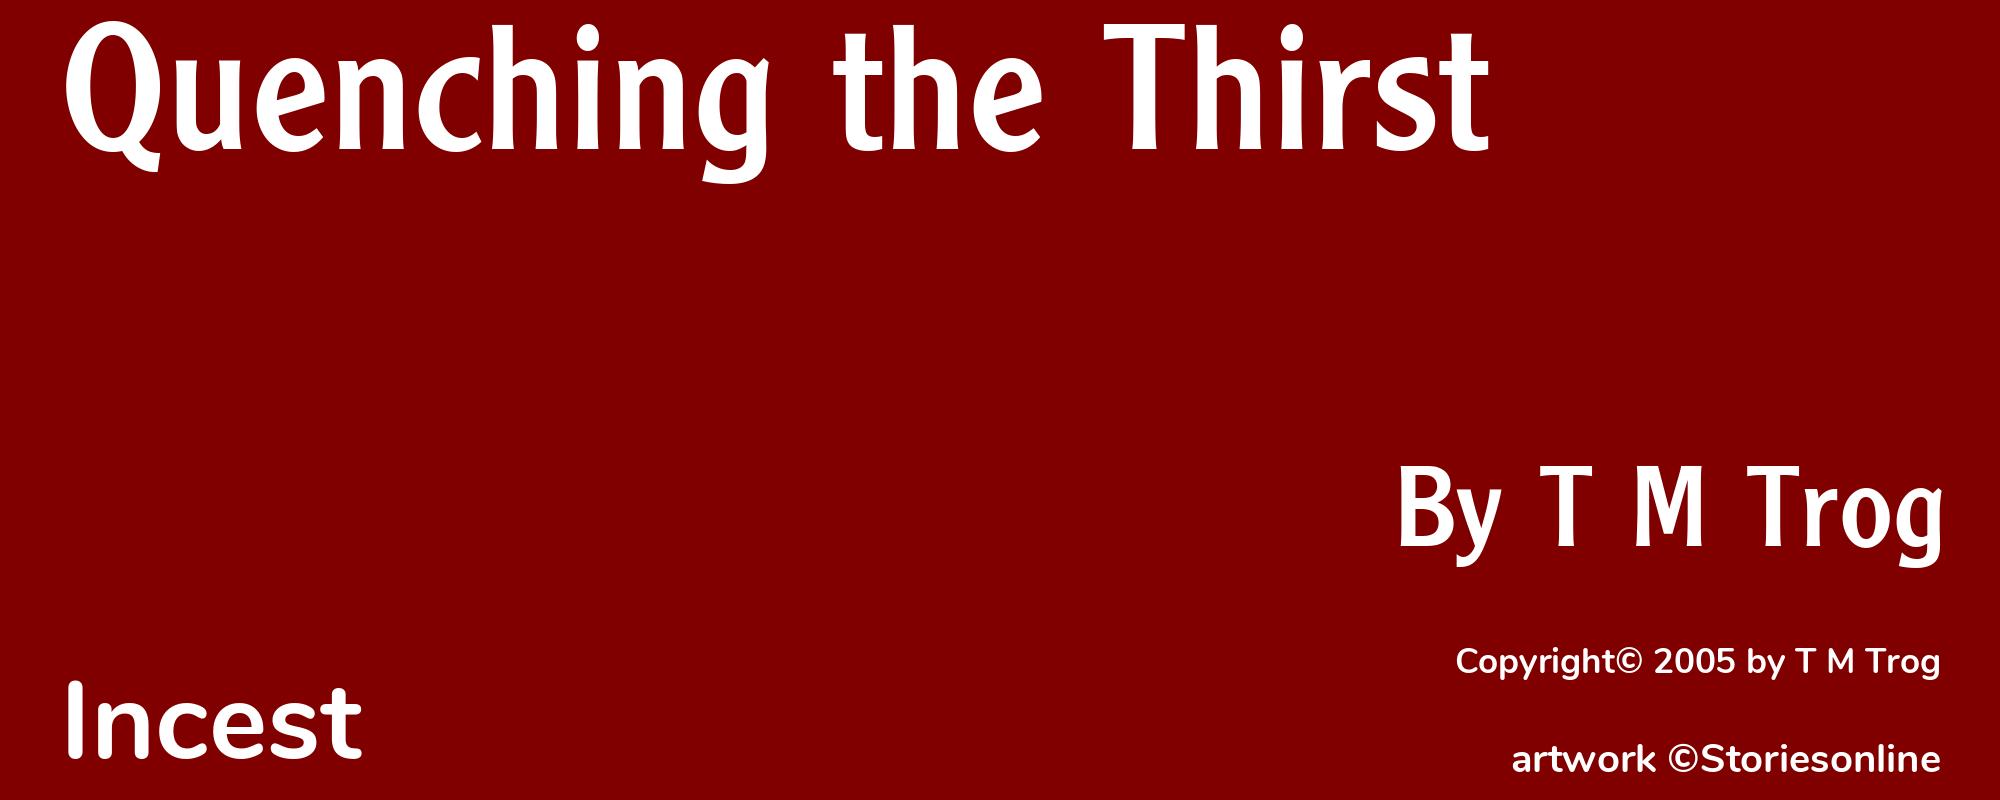 Quenching the Thirst - Cover